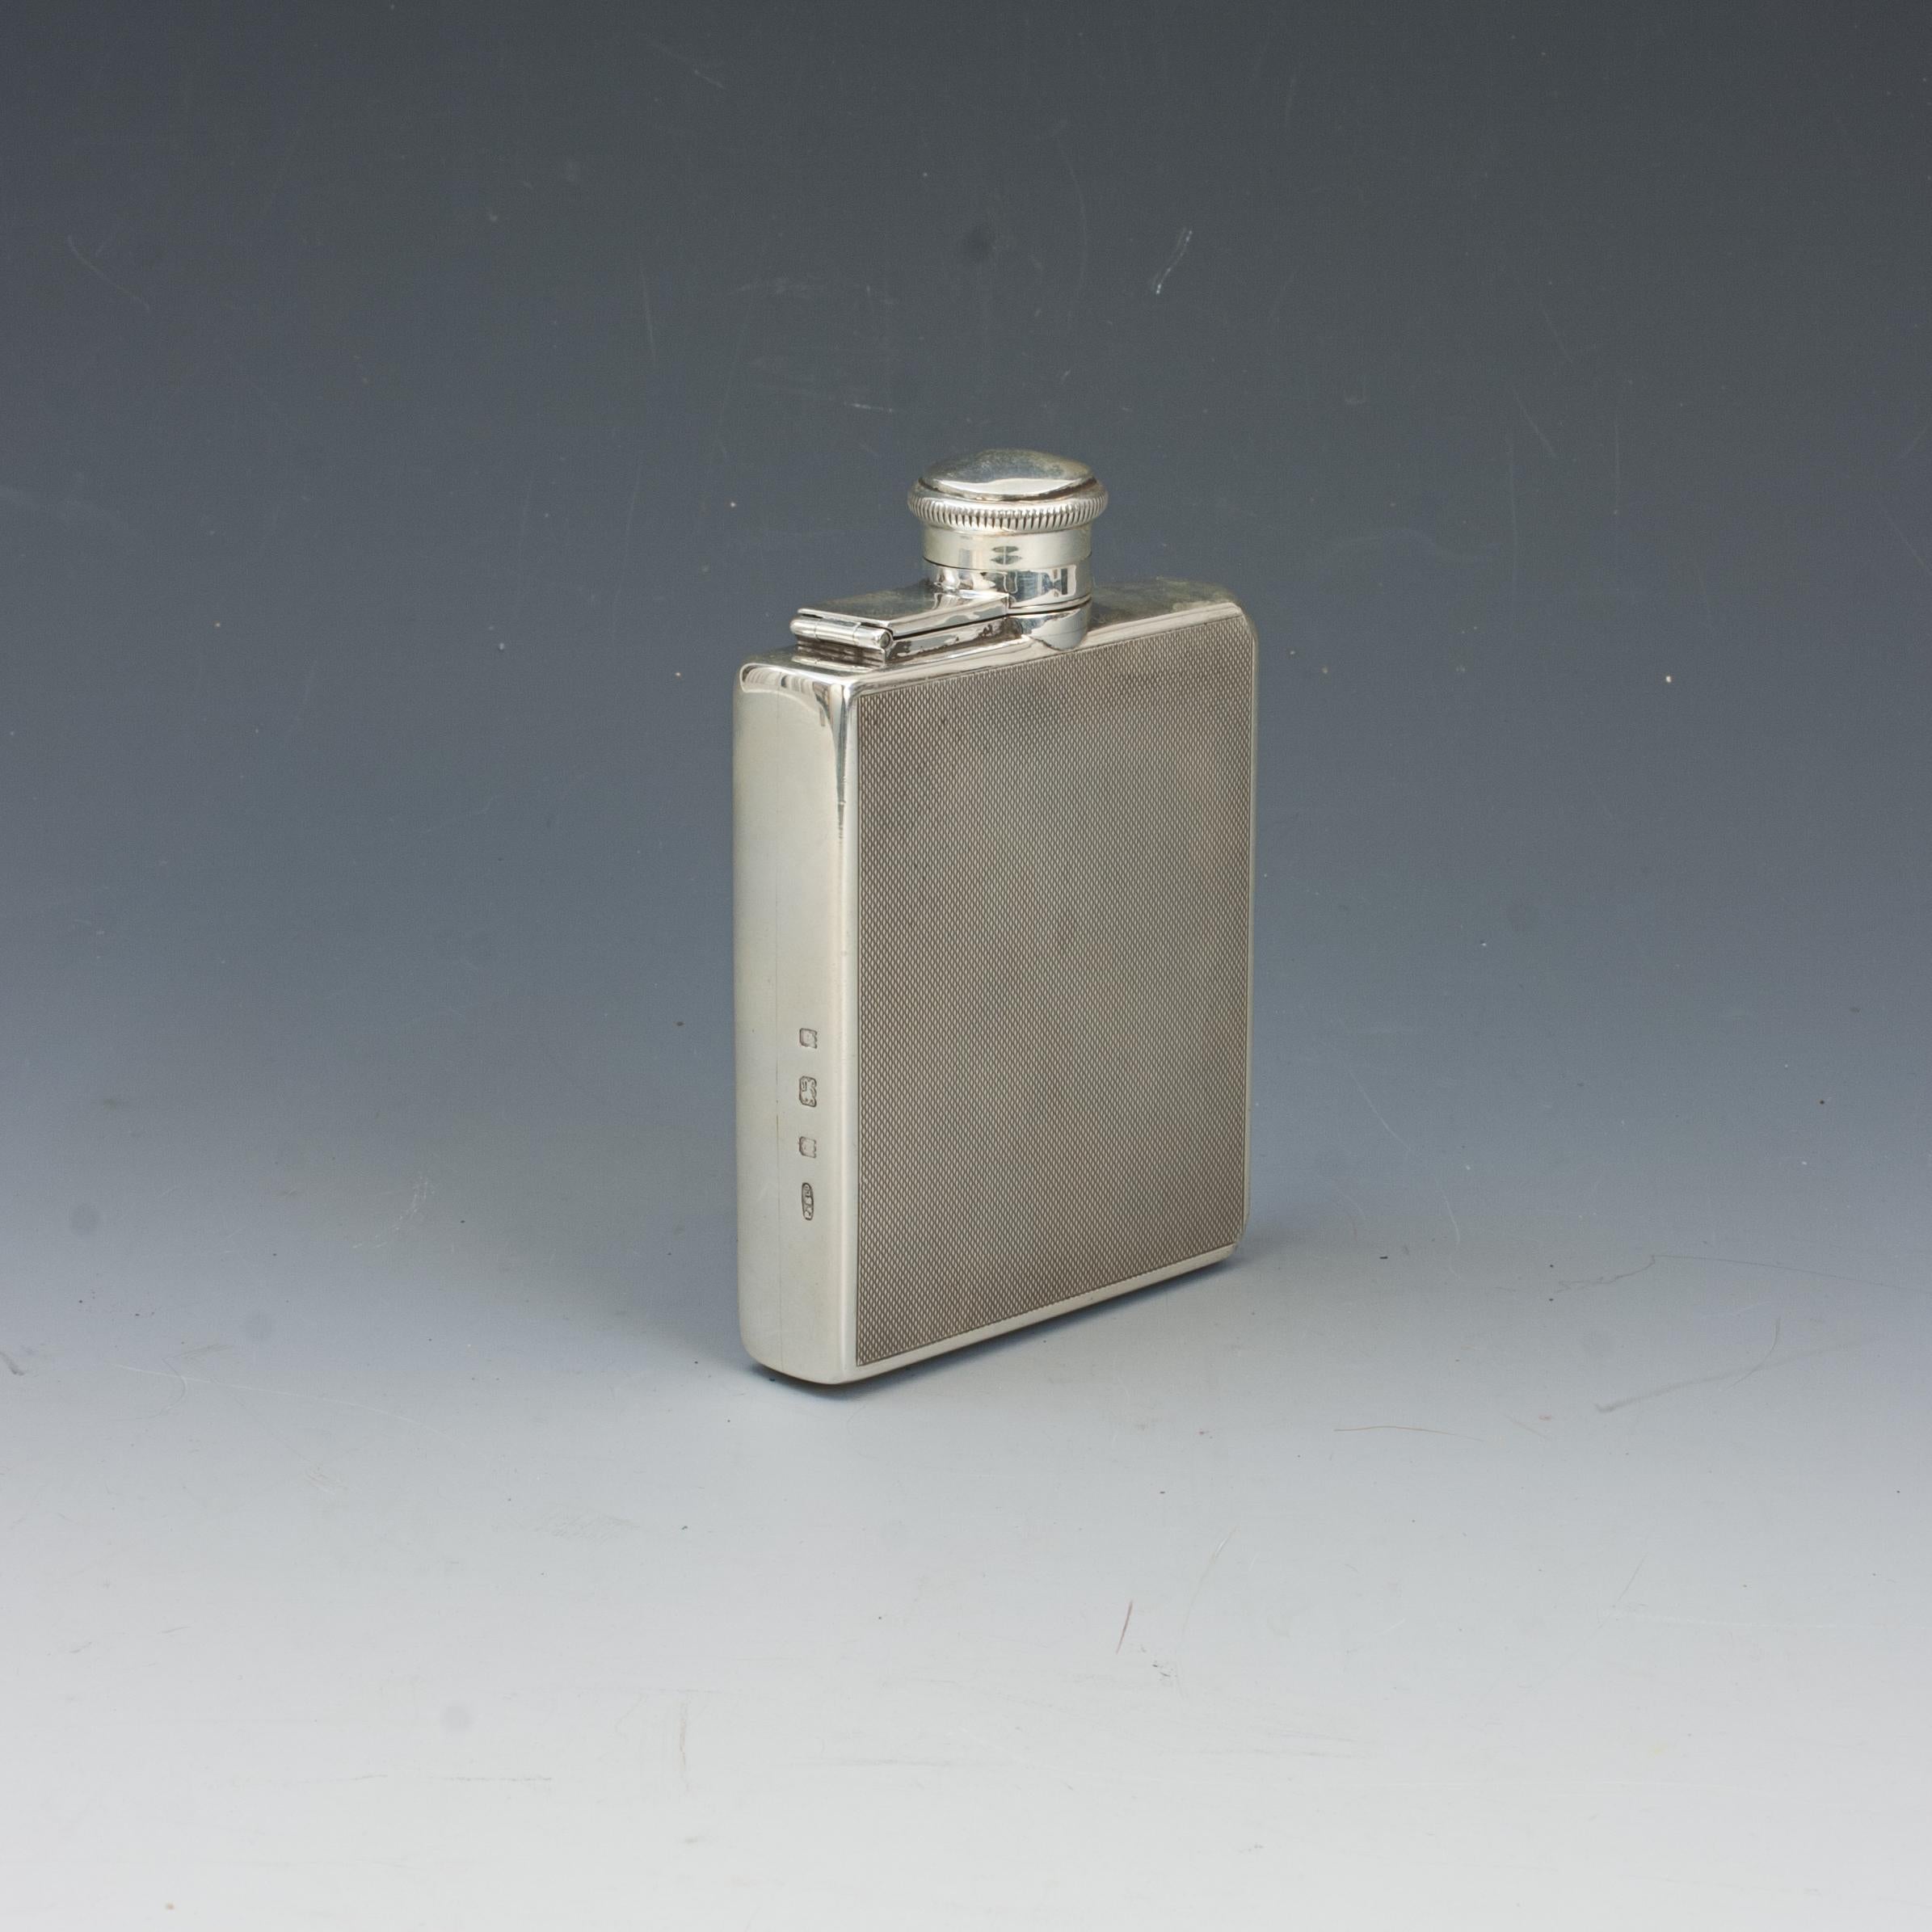 Padgett & Braham Art Decco Silver Hip Flask.
A beautiful gentleman's pocket silver spirit hip flask by Padgett & Braham Ltd, hallmarked London 1929. A rectangular form hip flask with hinged bayonet top. A beautiful piece with engine-turned finish.

